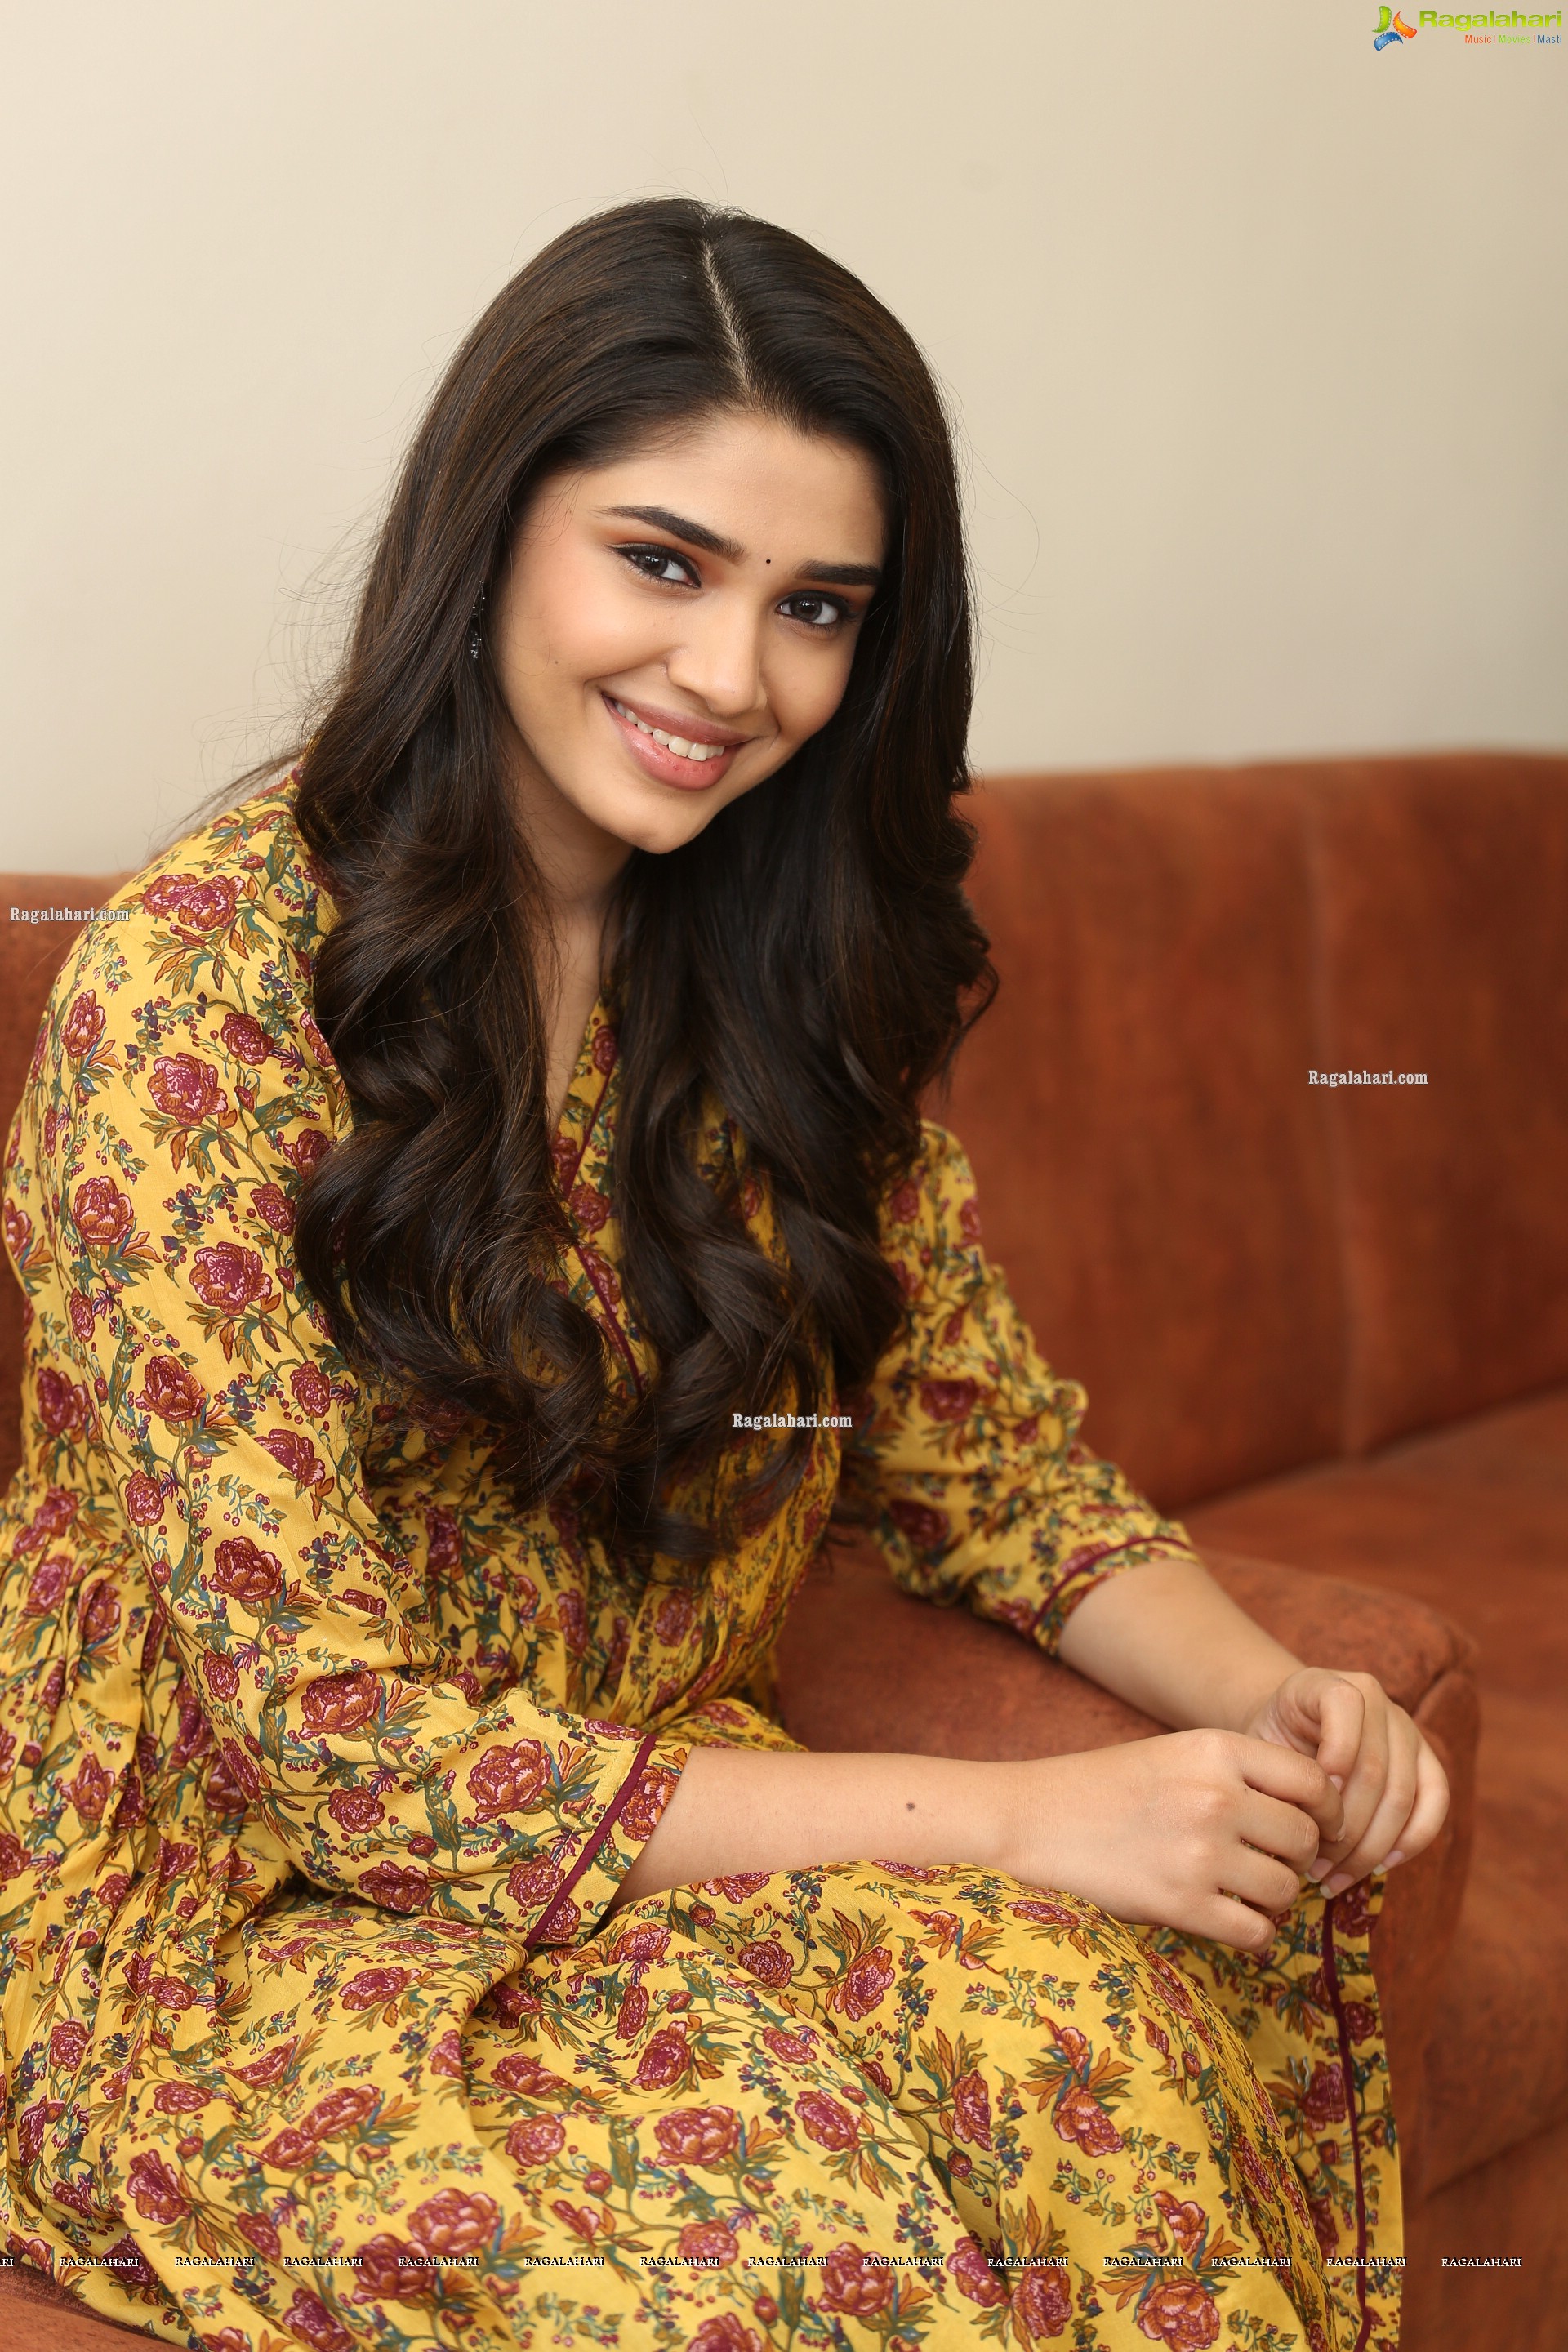 Krithi Shetty at Uppena Movie Interview, HD Photo Gallery